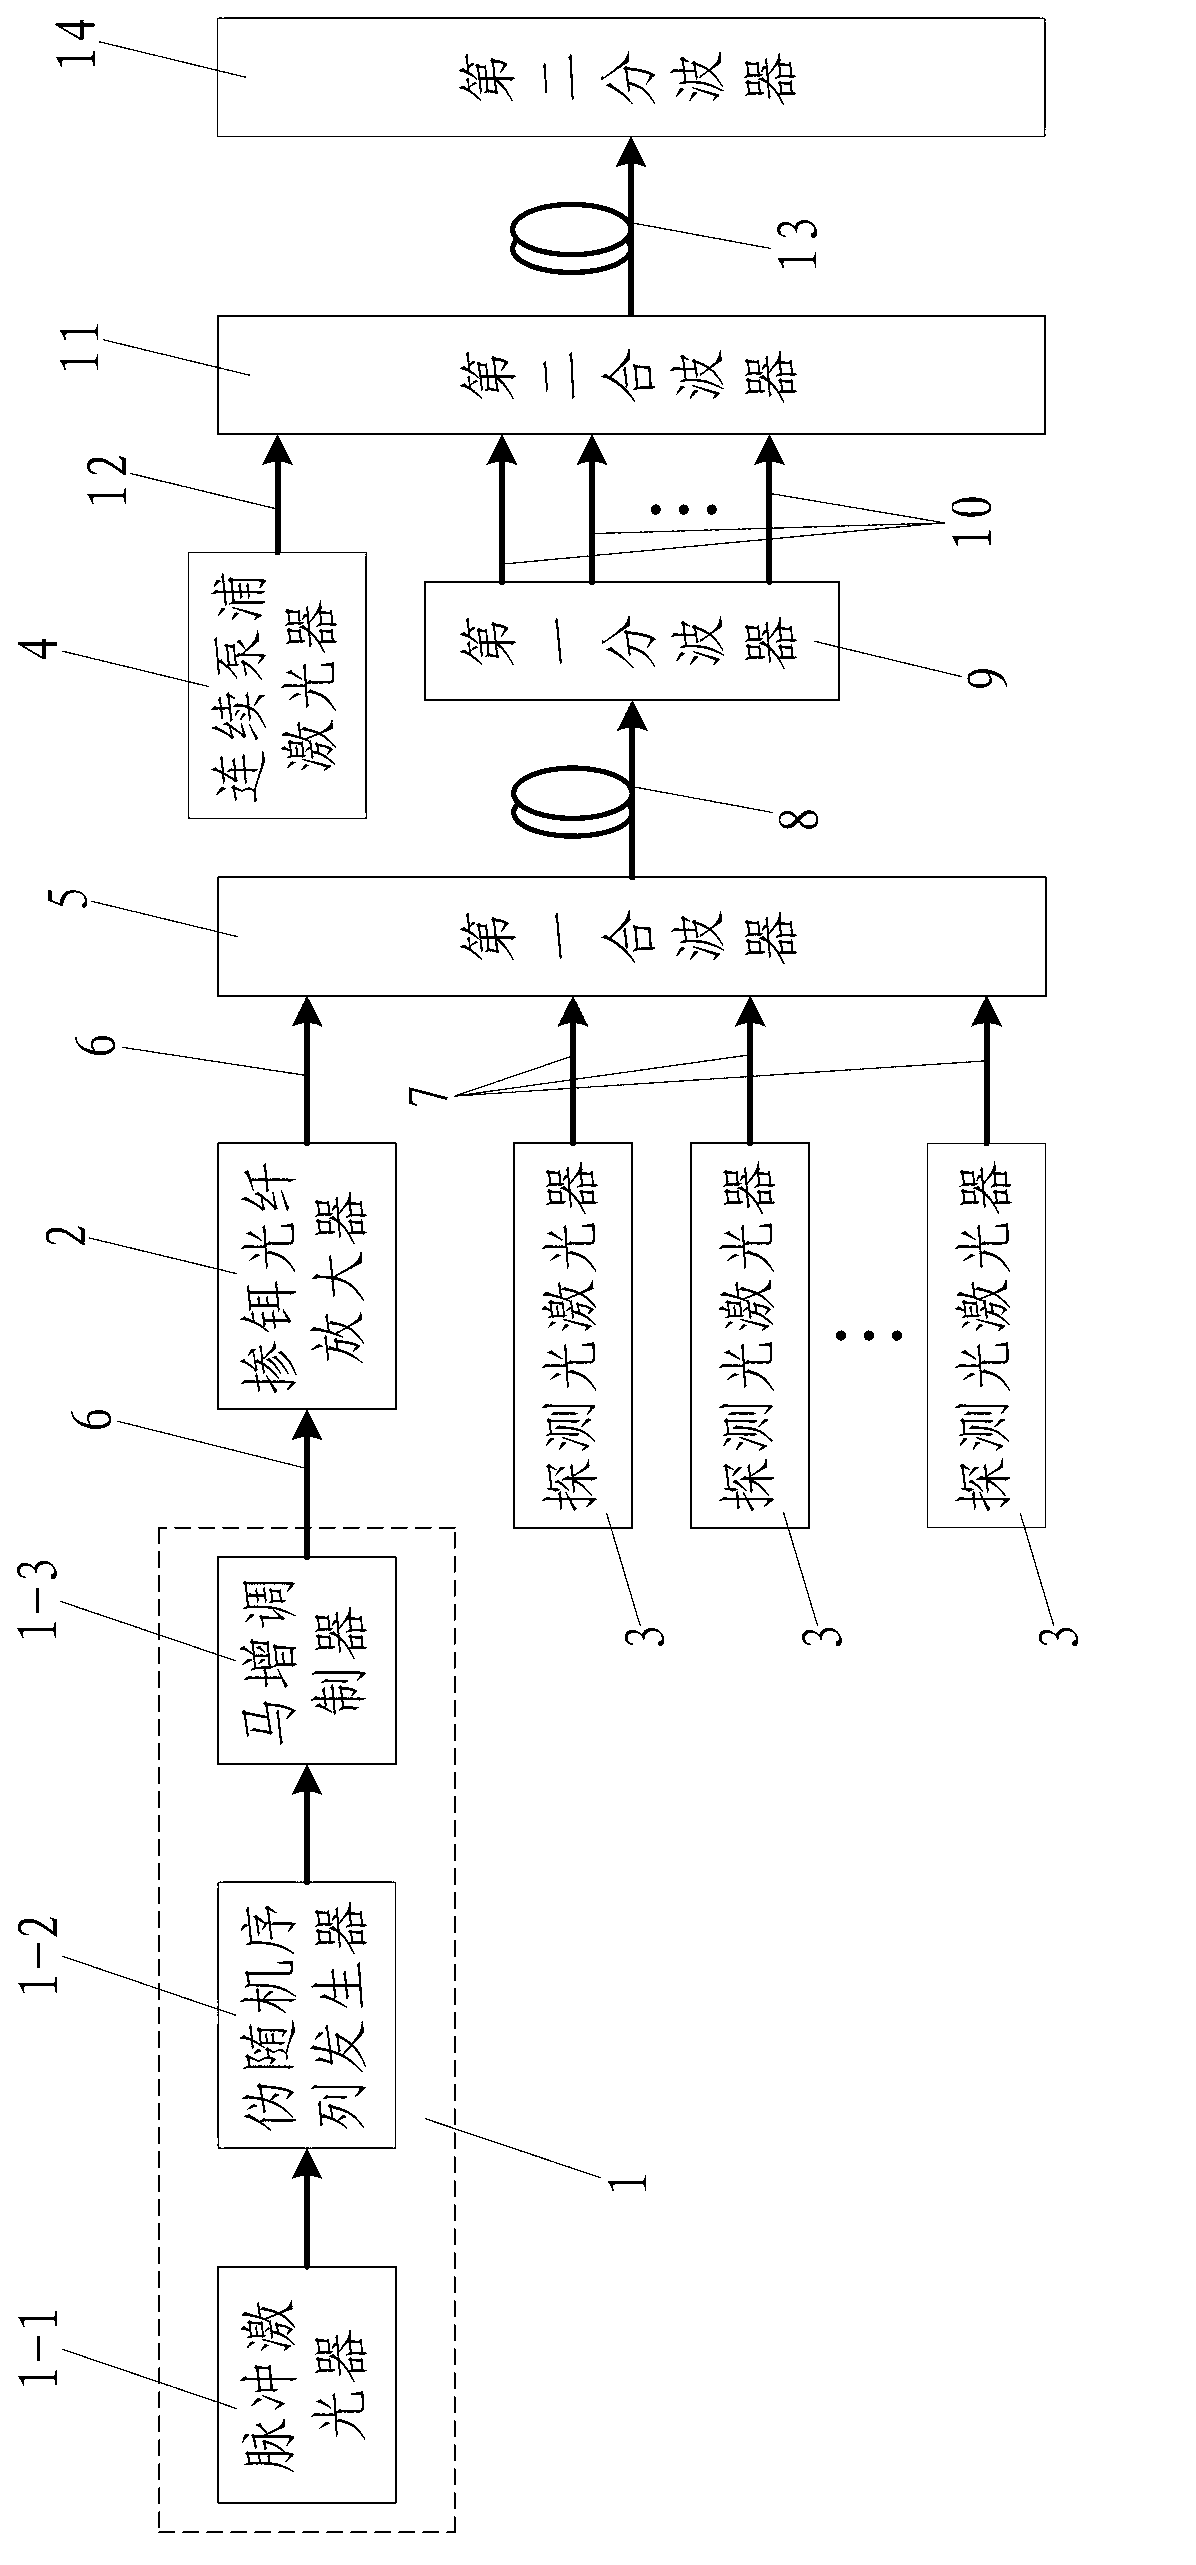 Raman multi-wavelength converter and method for realizing gain flatness by connecting two fibers in series